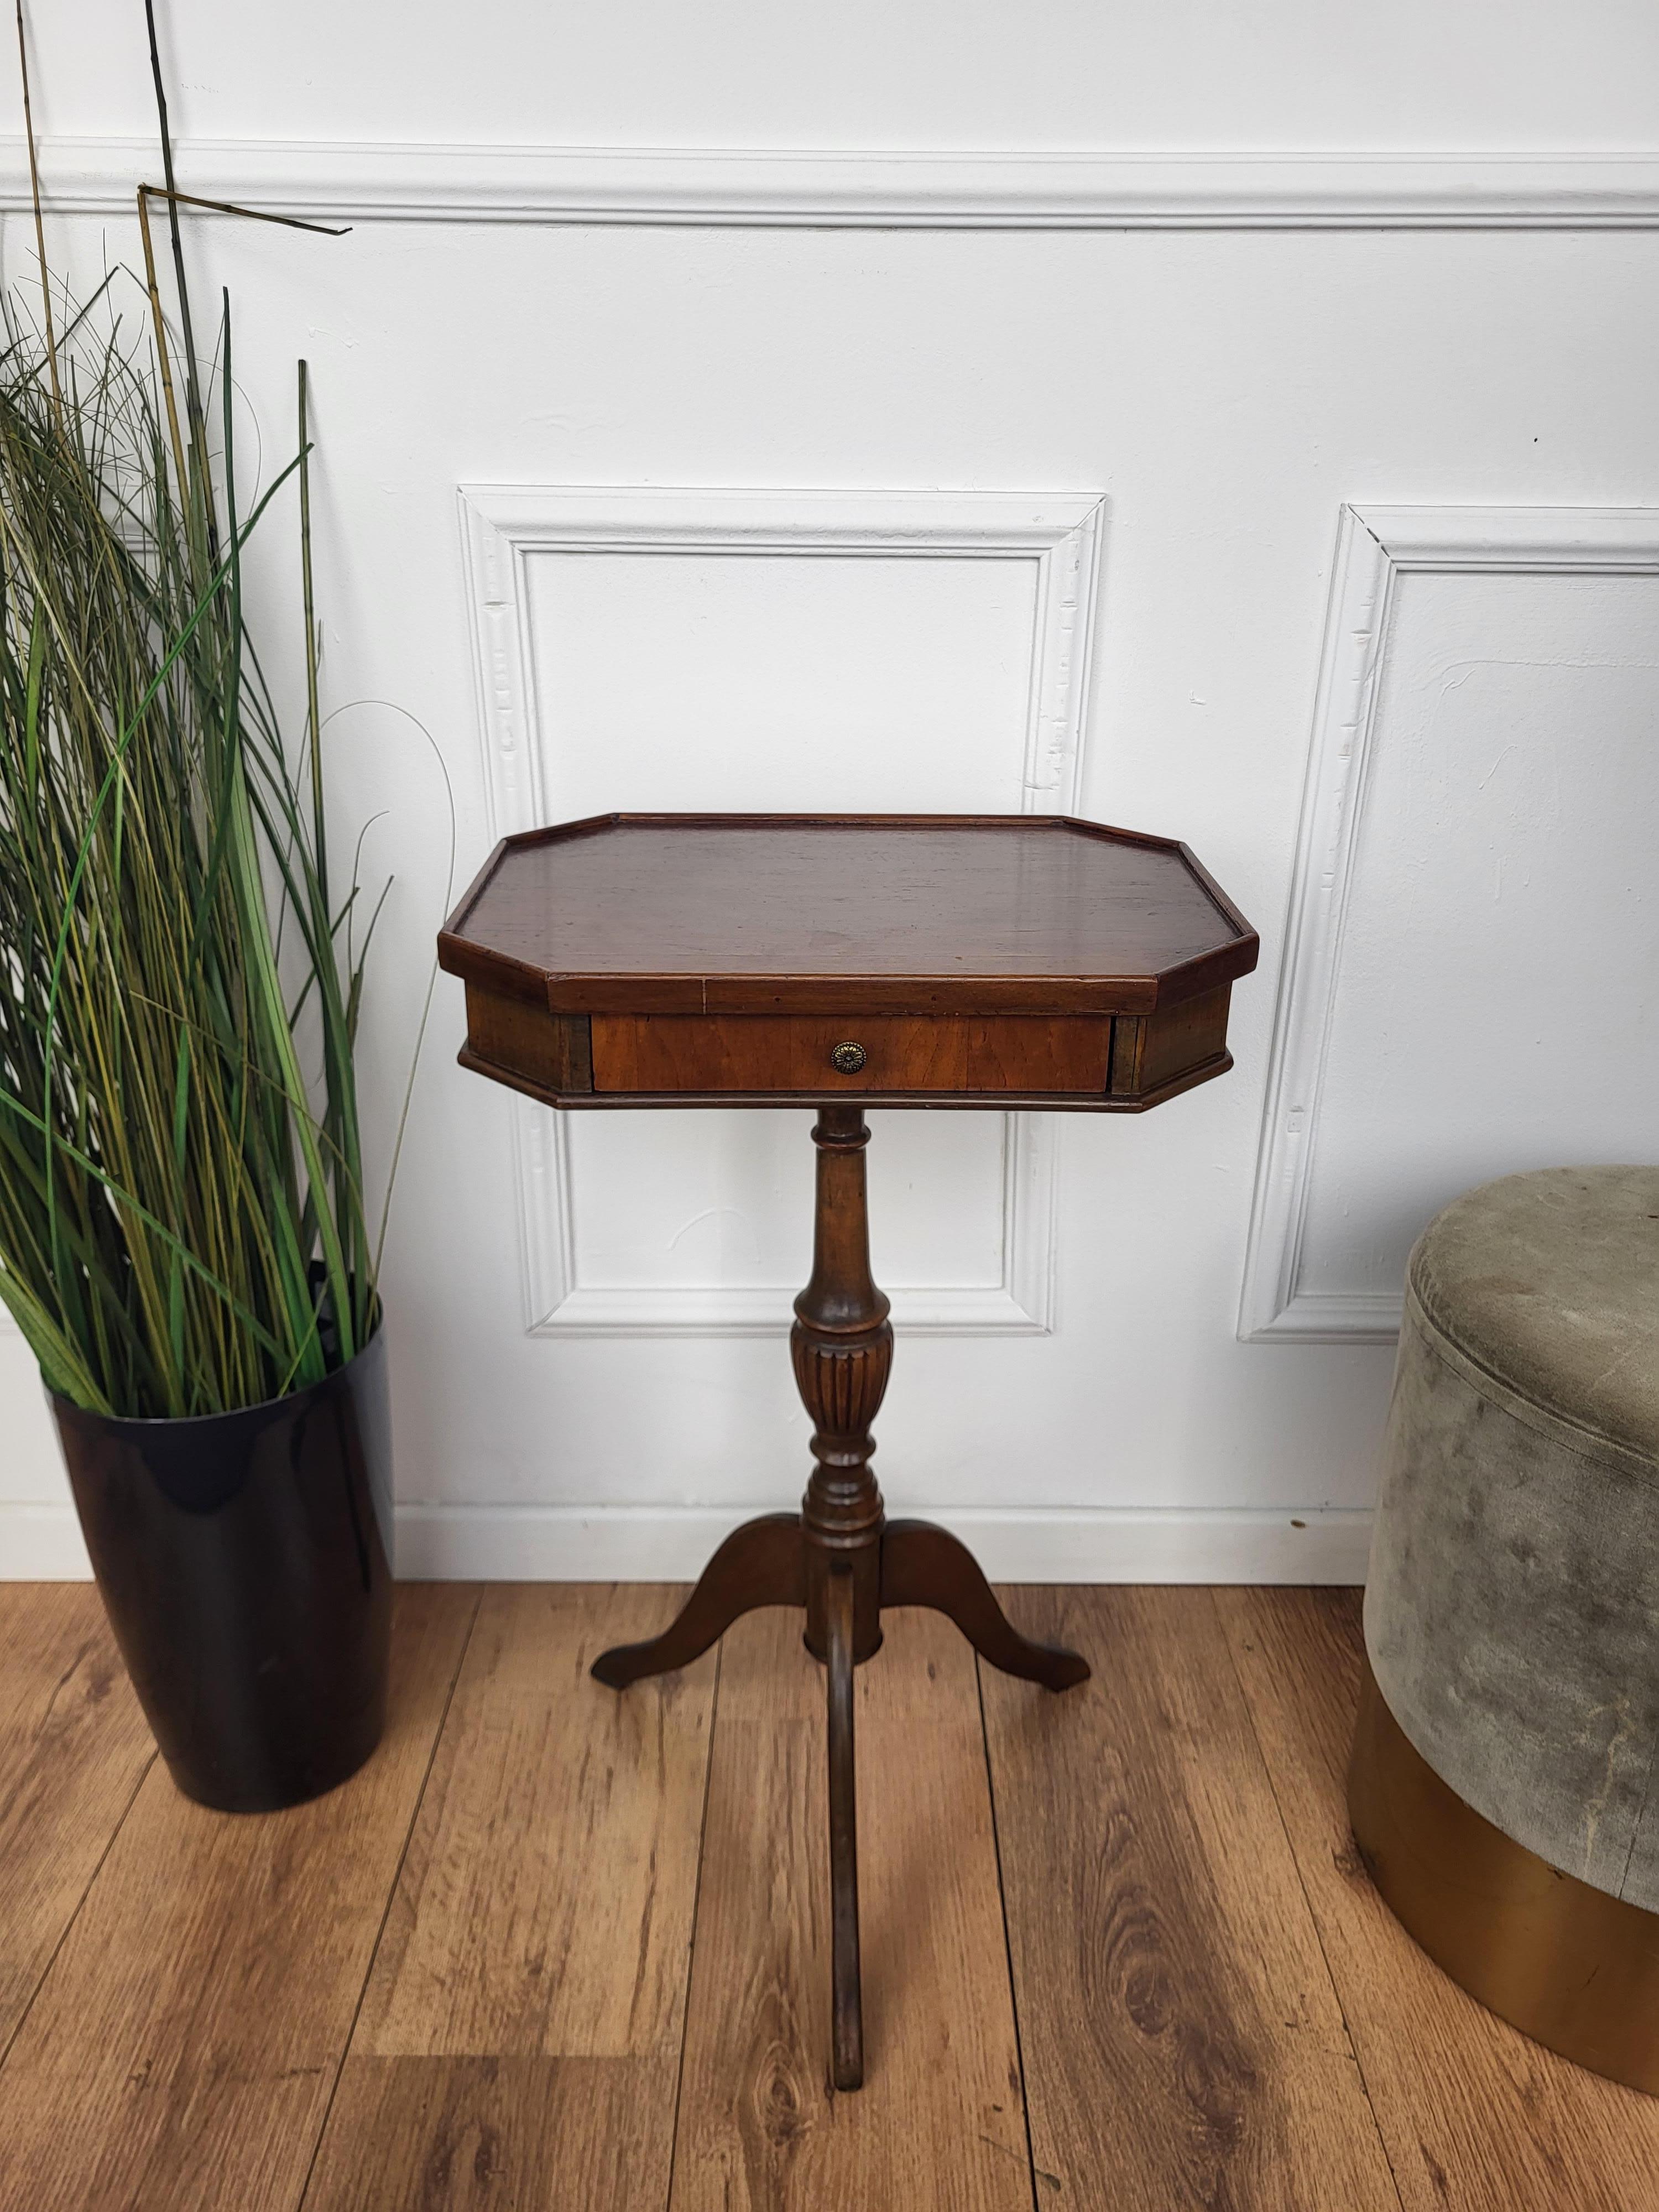 A beautiful Italian Walnut octagonal side table with great details and frames shaped in Victorian, Napoleon III, Louis XV style with front drawer and the tripod feet legs. A very elegant, modern and classic piece that showcases the refined